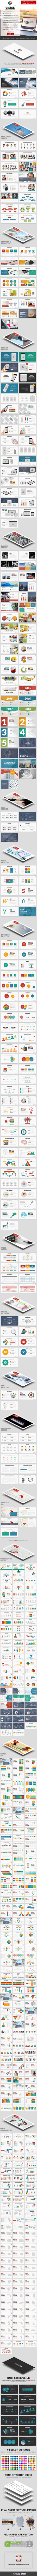 Vision - Startup Business PowerPoint Template